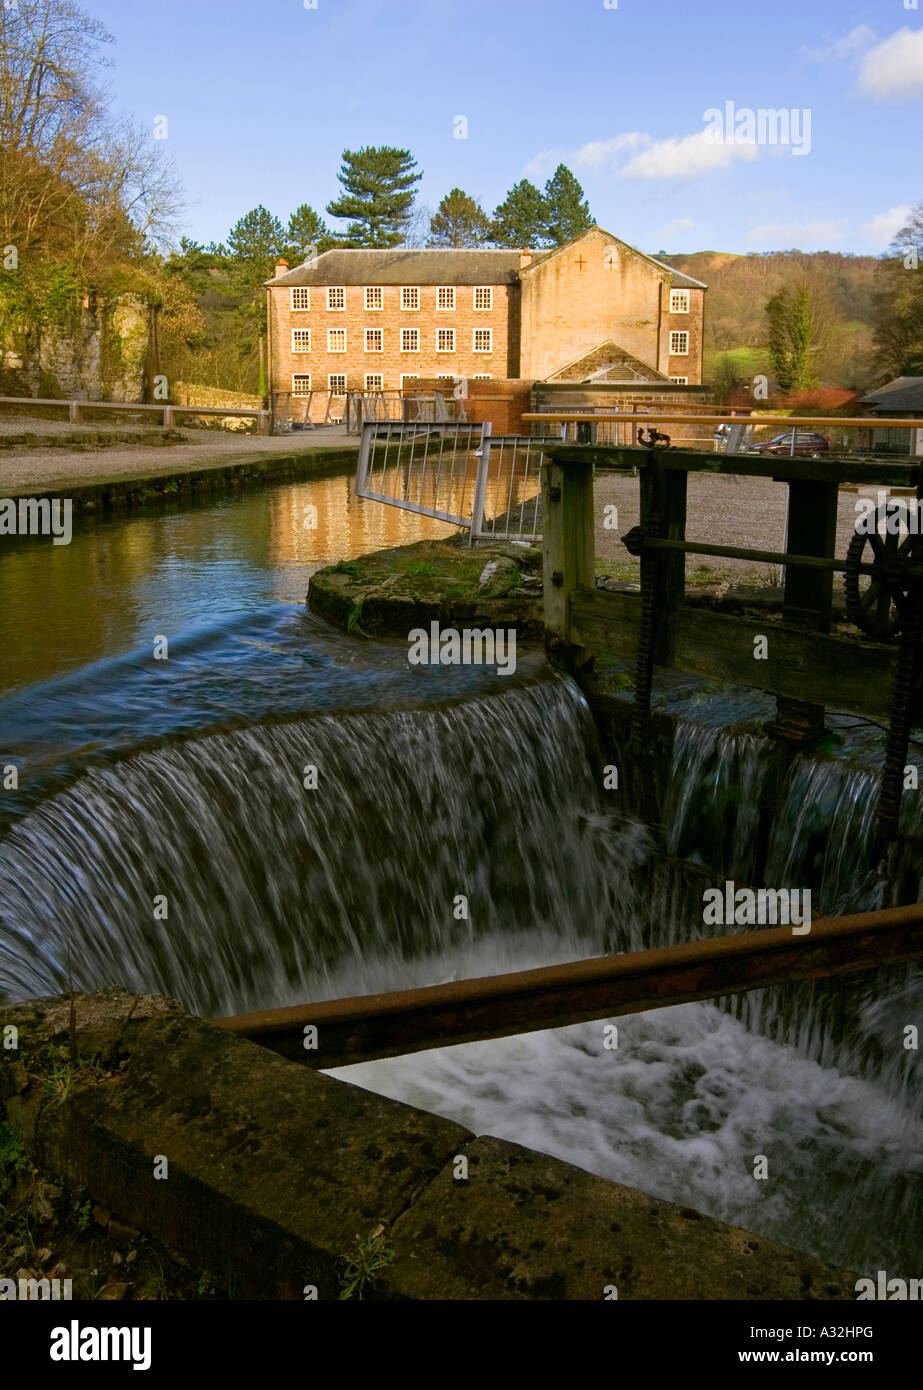 Cromford Mill Derbyshire England the first water powered cotton spinning mill in the world built 1771 now a world heritage site Stock Photo